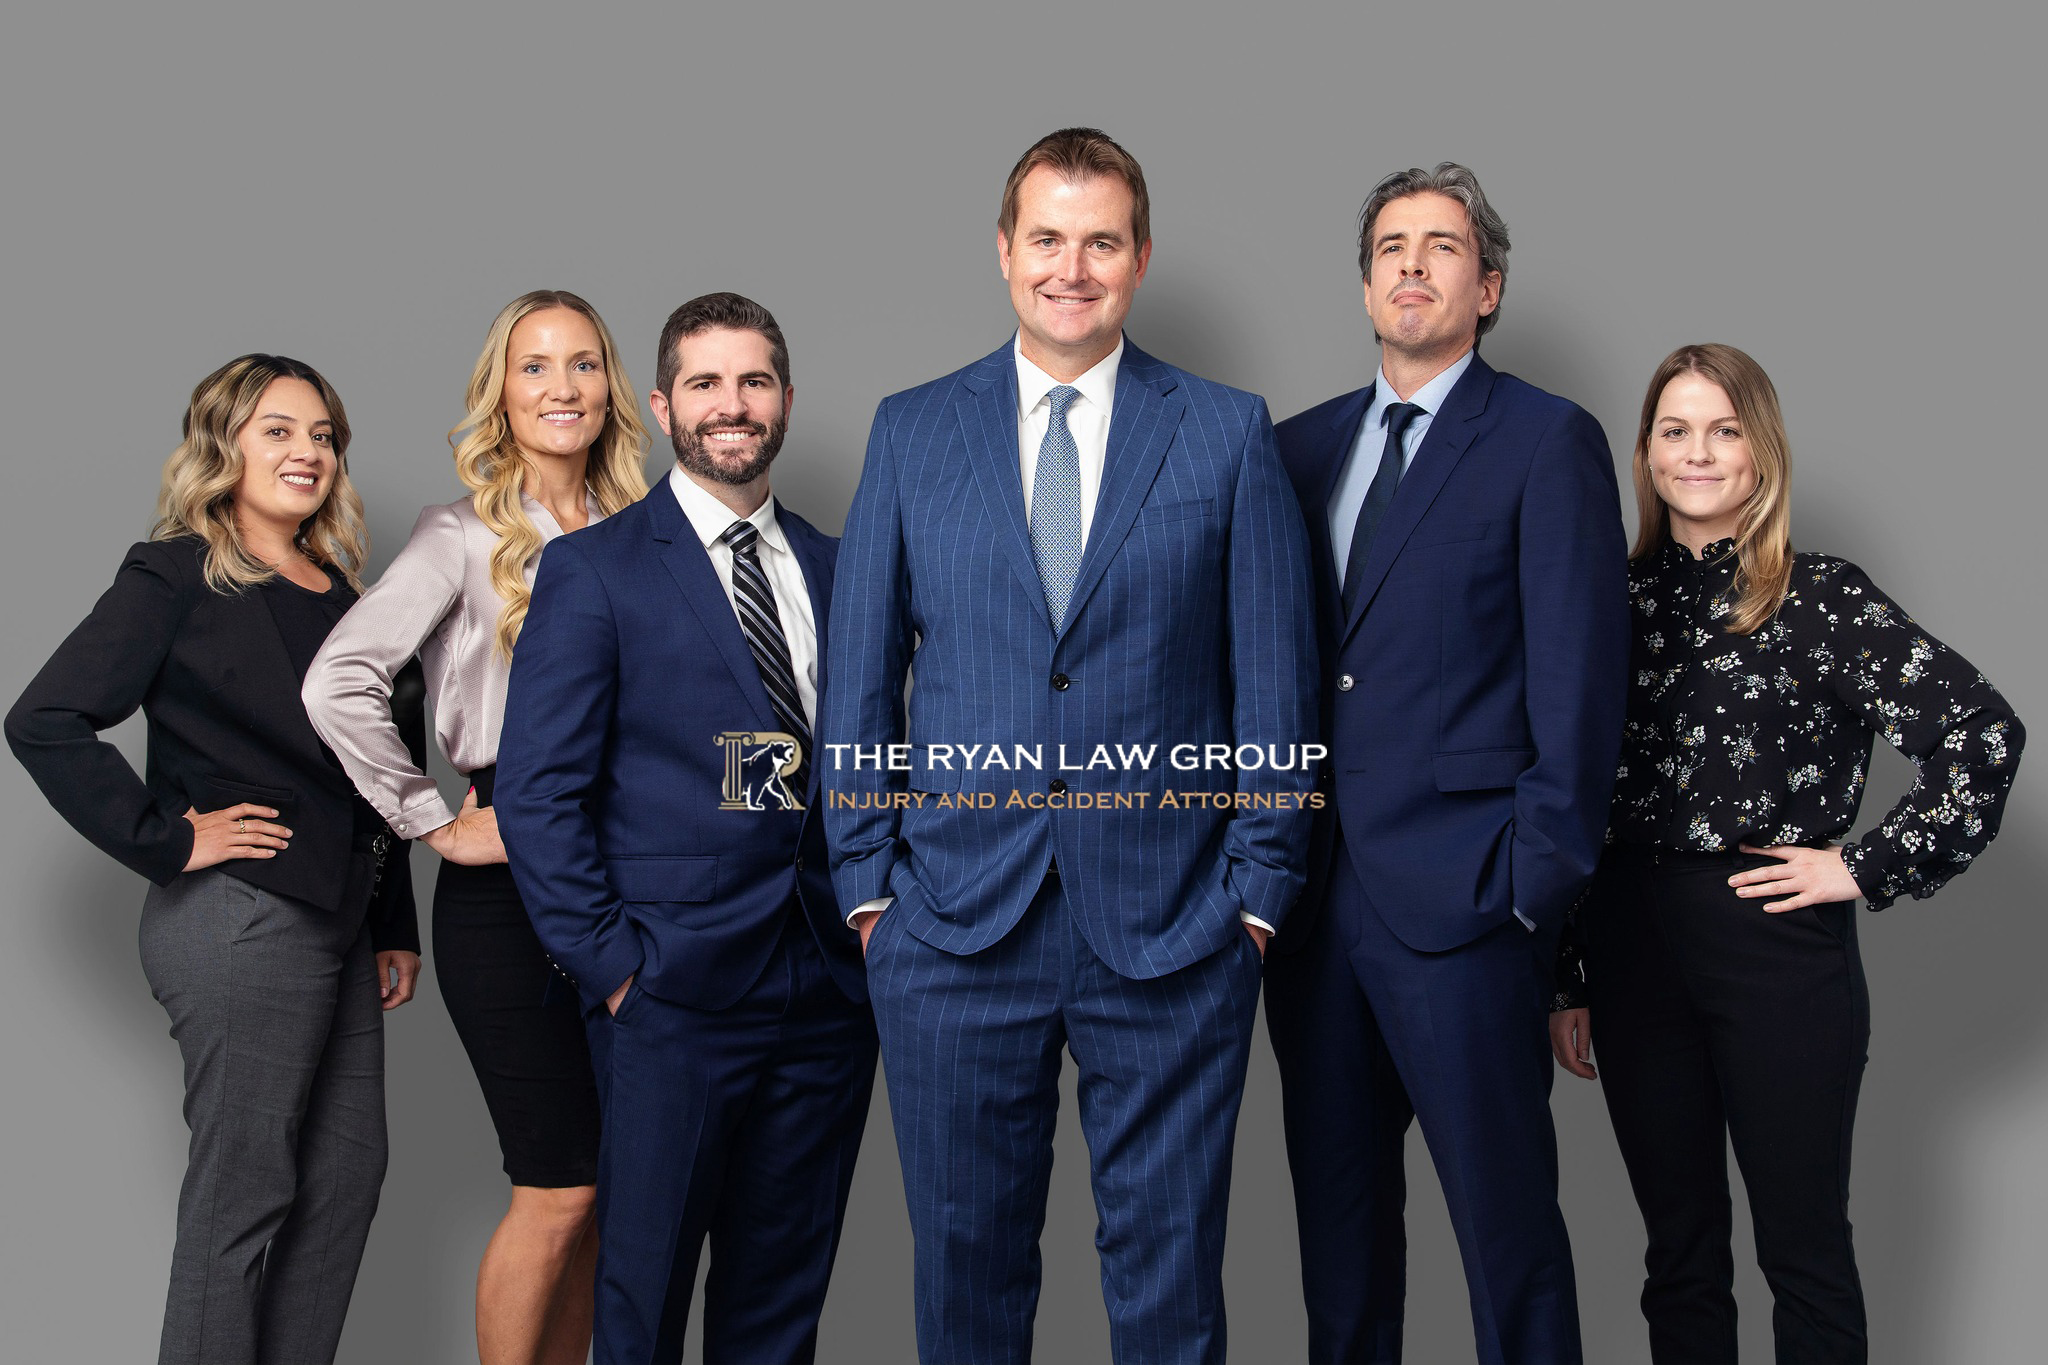 The Ryan Law Group Injury and Accident Attorneys | 445 S Figueroa St #3100, Los Angeles, CA 90744, United States | Phone: (213) 293-3757